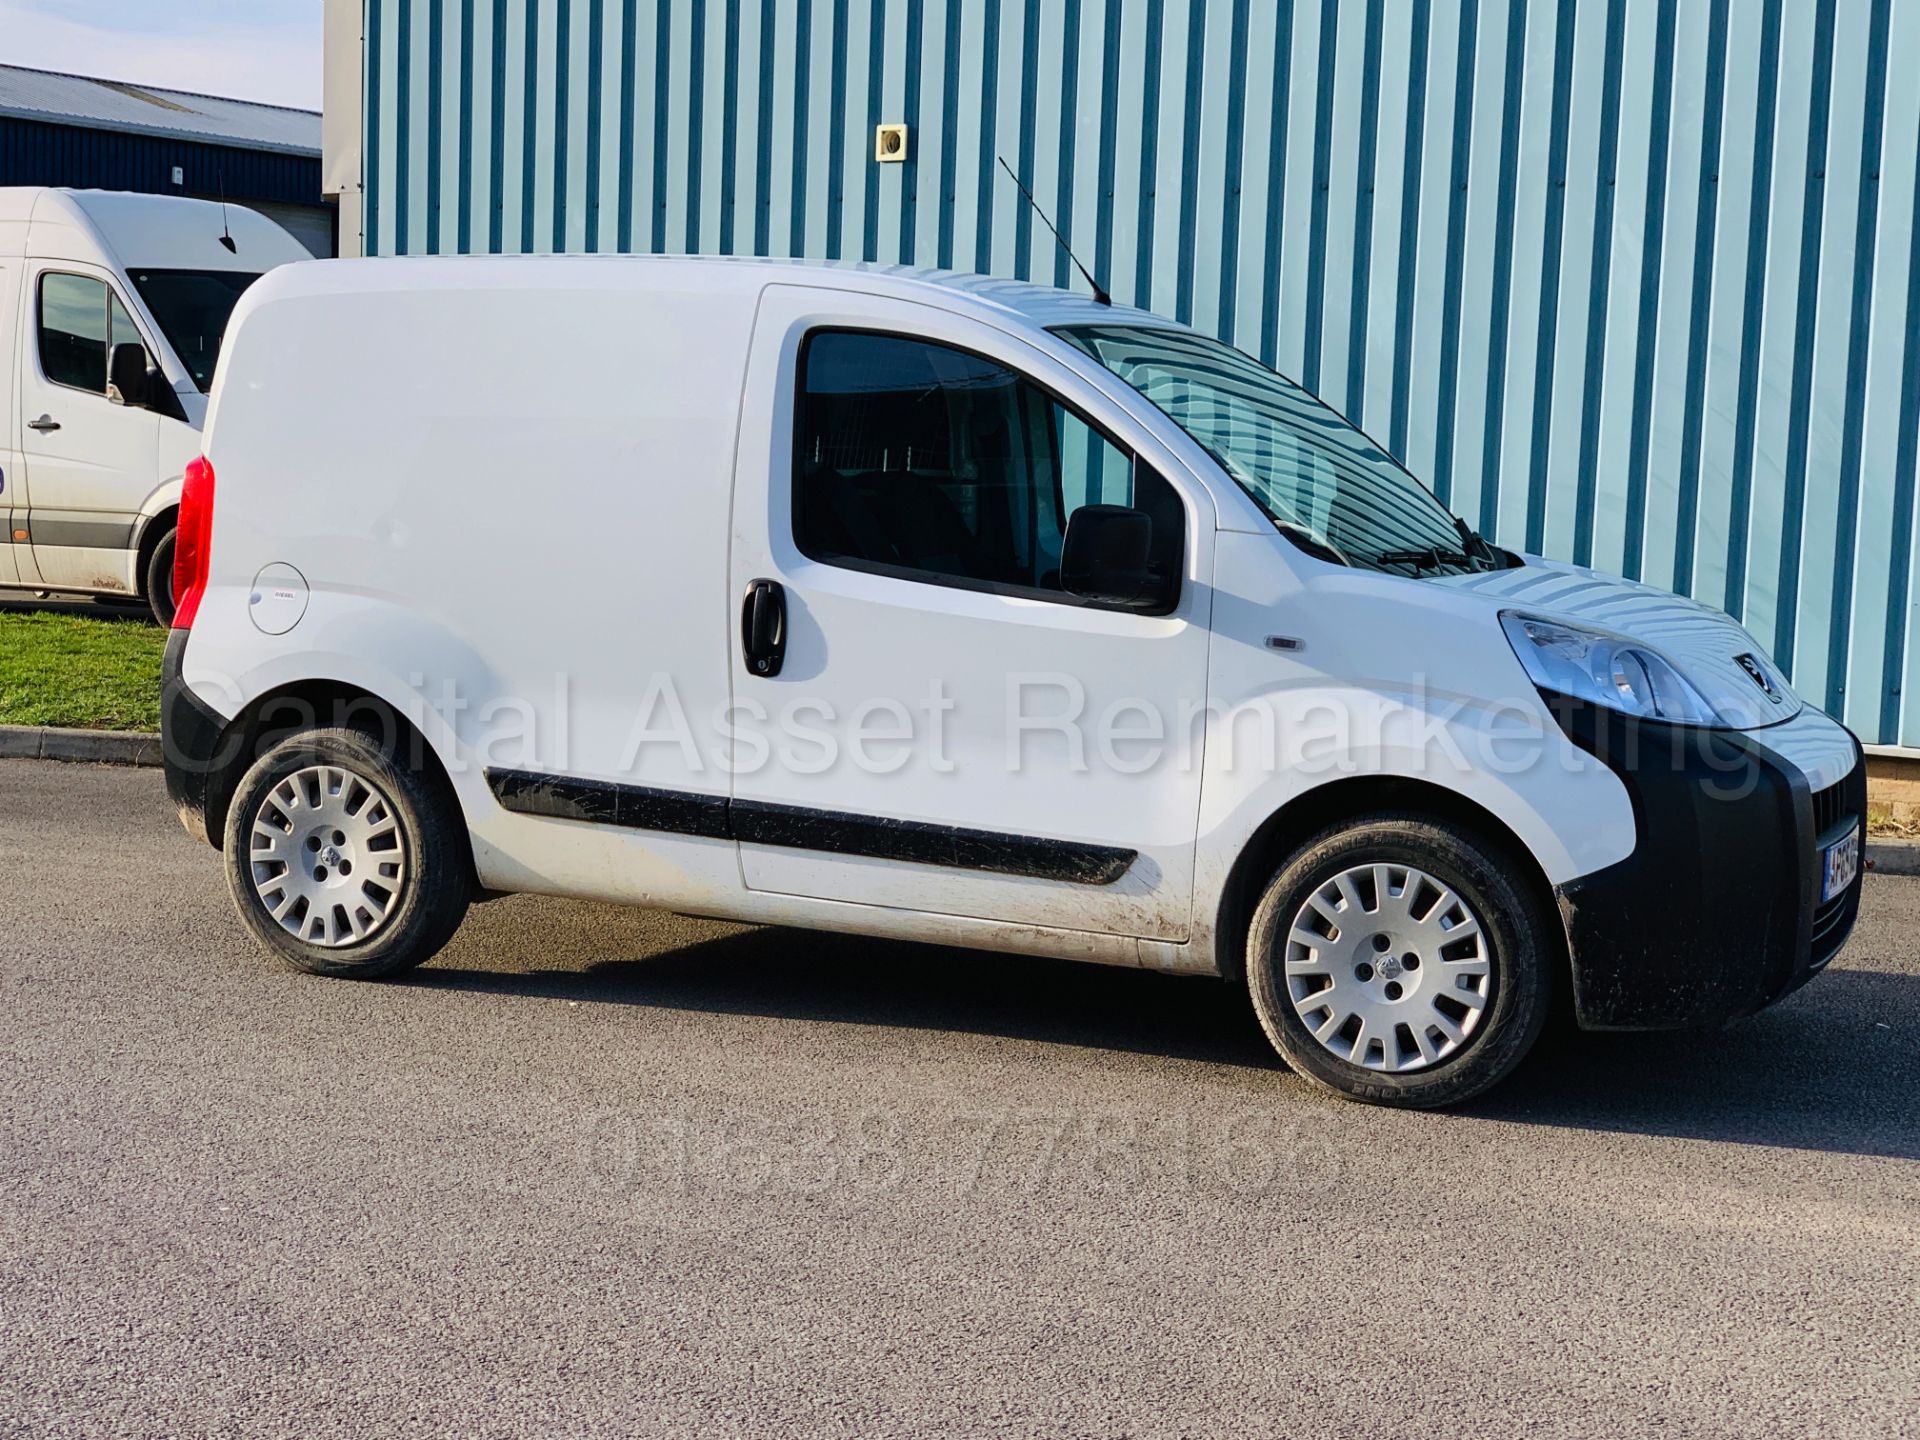 (On Sale) PEUGEOT BIPPER *PROFESSIONAL* LCV - PANEL VAN (65 REG) 'HDI - 5 SPEED' (1 OWNER) *AIR CON* - Image 12 of 36